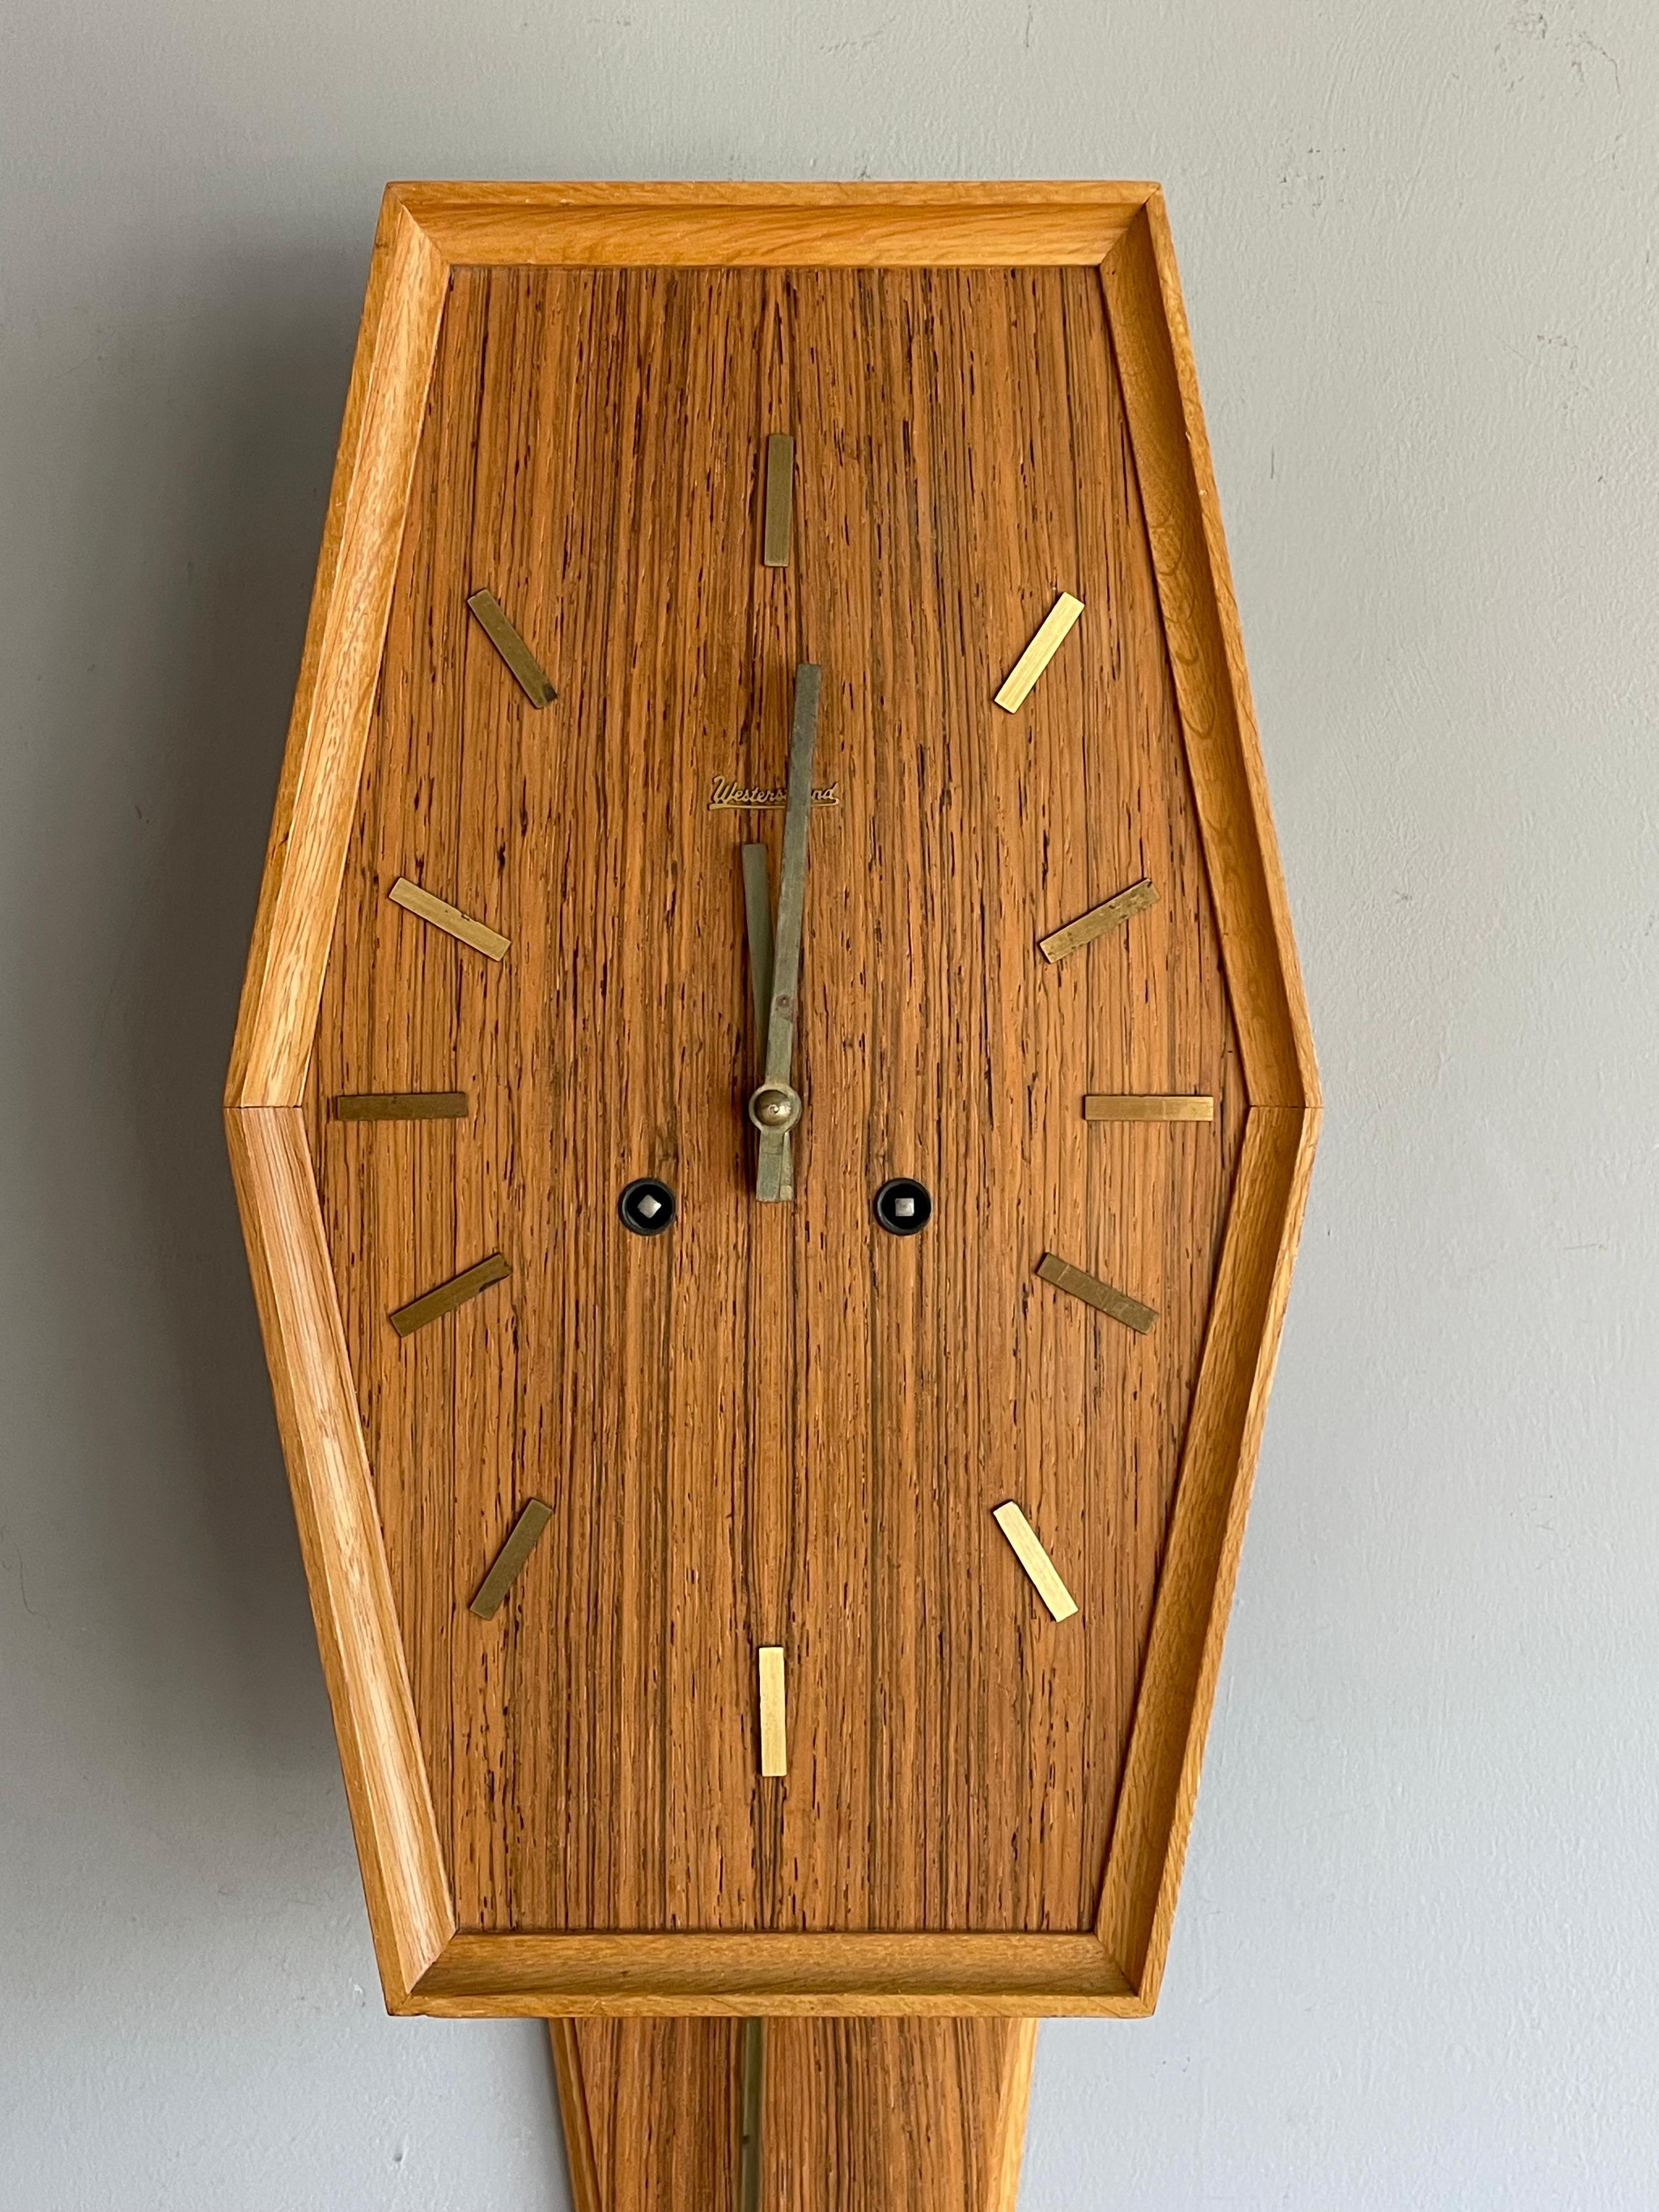 Cast Beautiful Midcentury Modern Wooden Pendulum Wall Clock By Westerstrand, Sweden For Sale